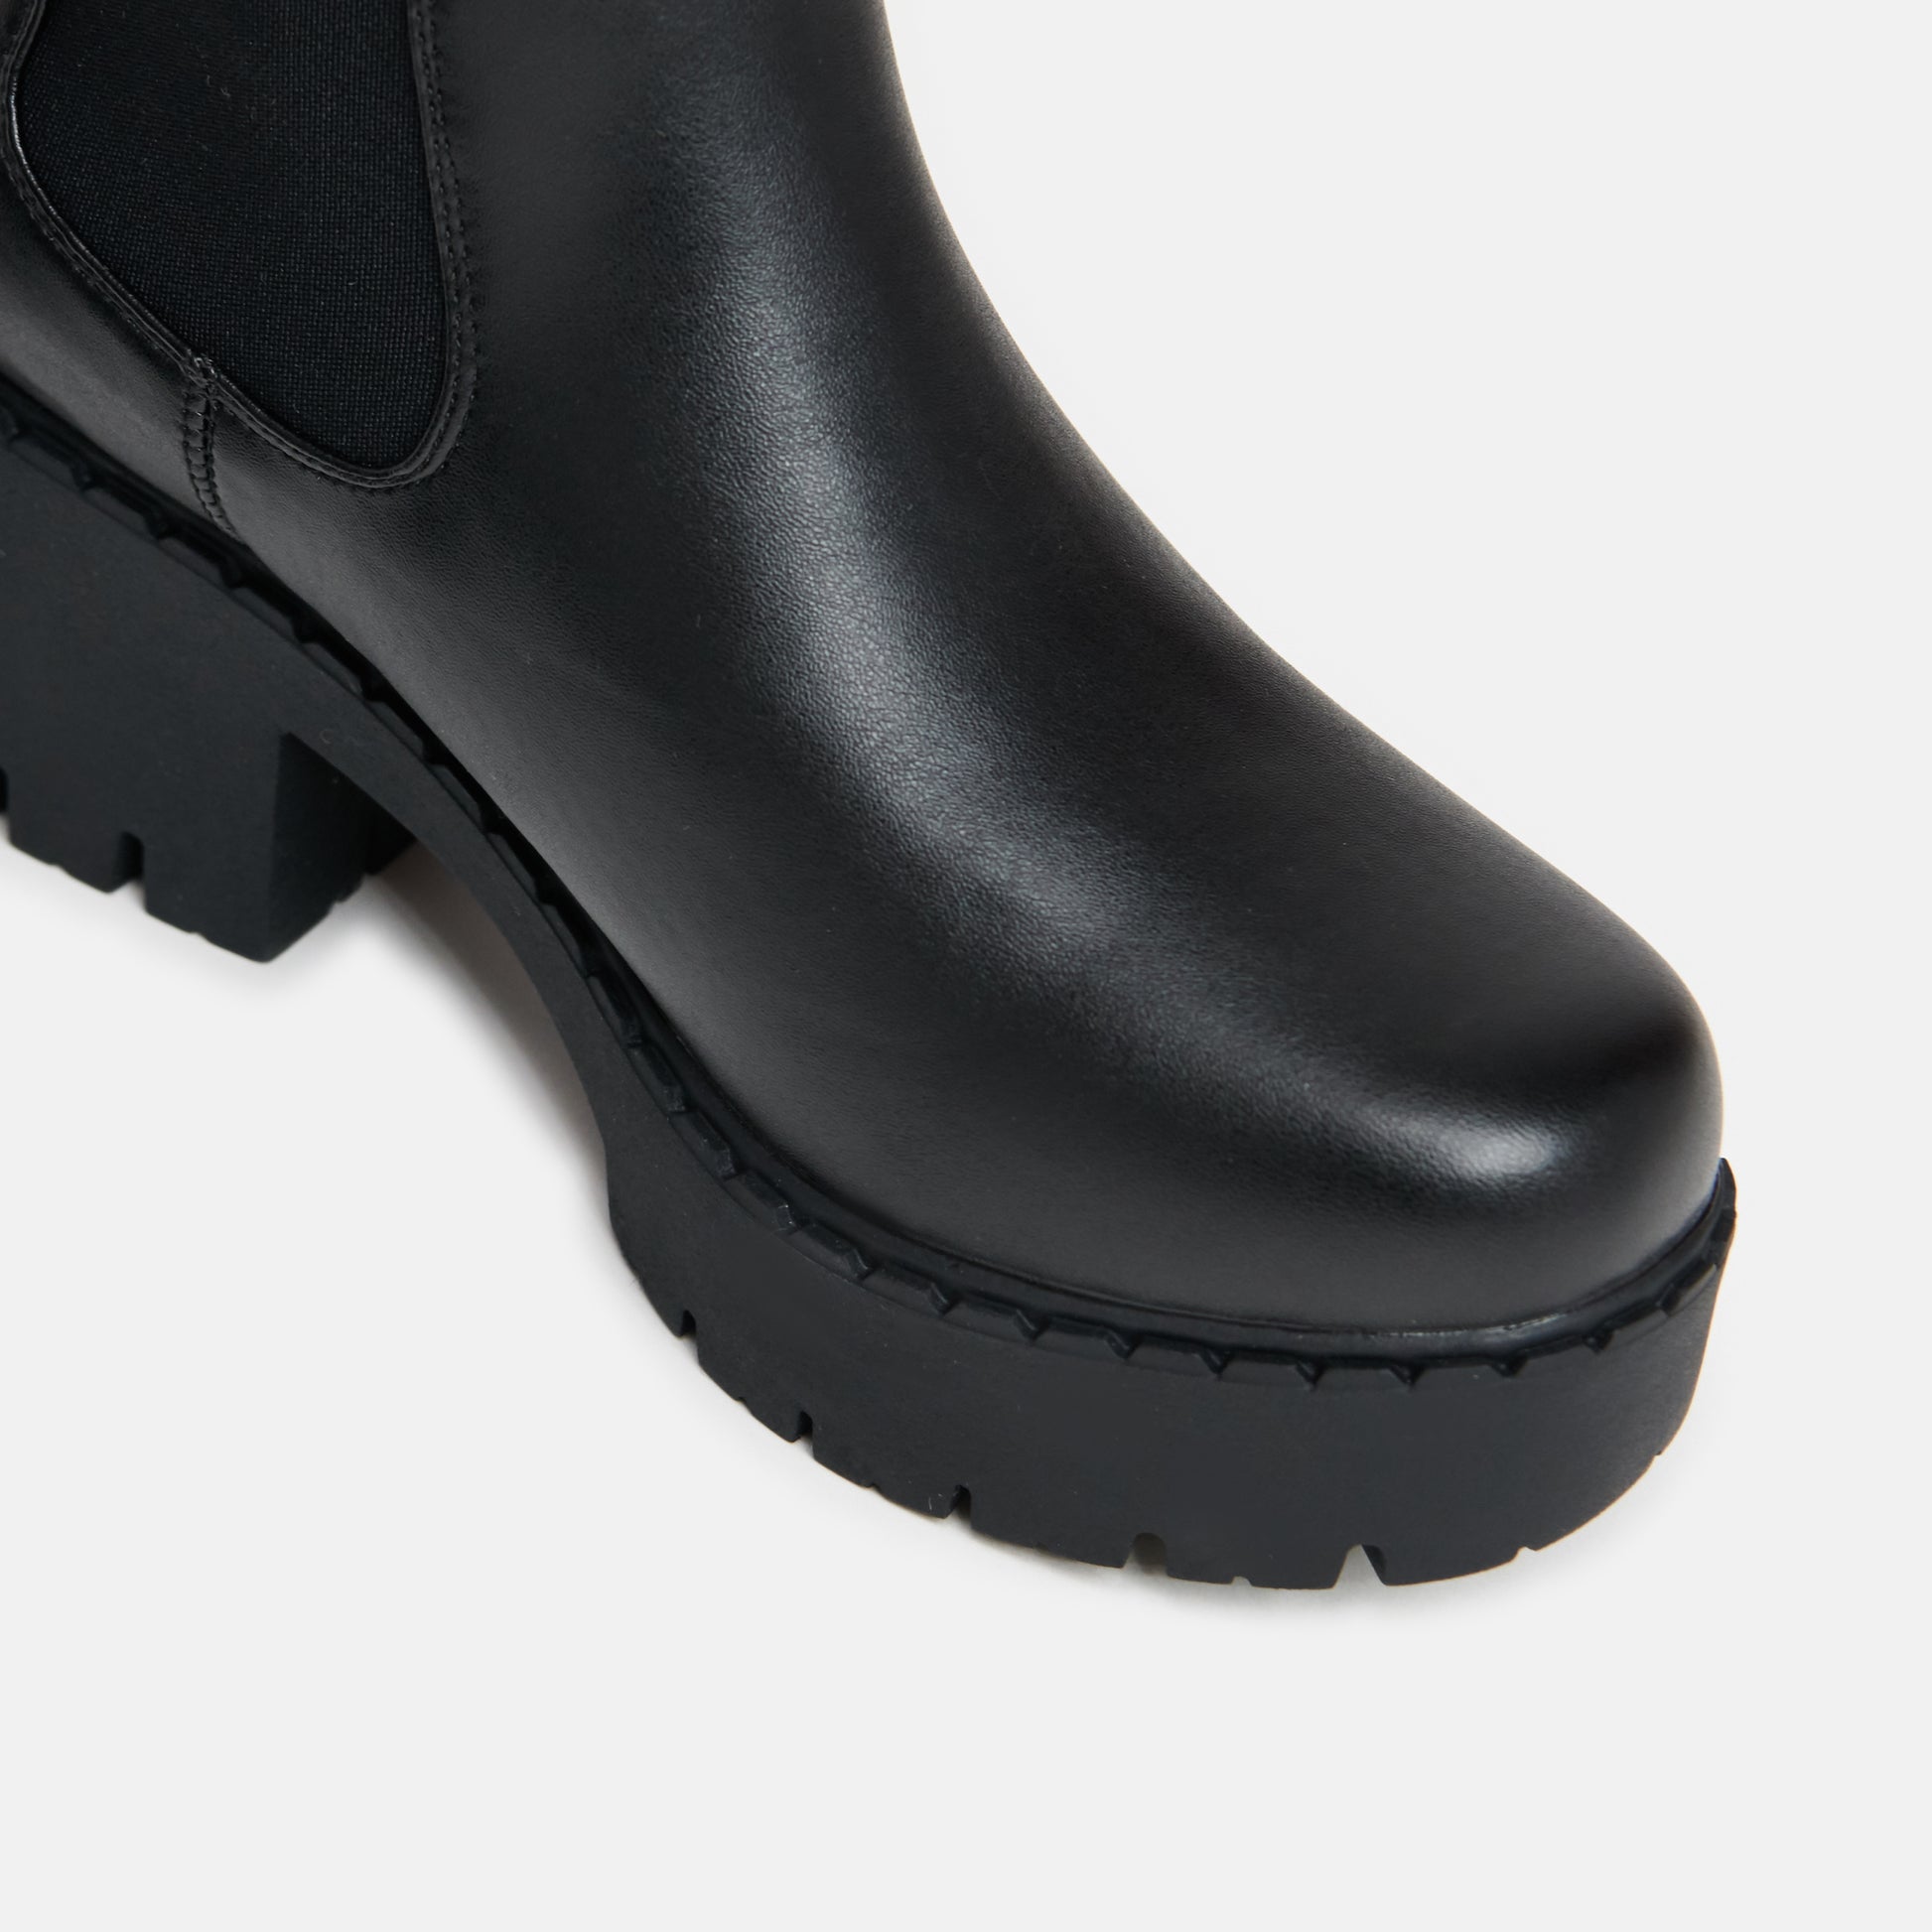 Orson Switch Chelsea Boots - Ankle Boots - KOI Footwear - Black - Top View